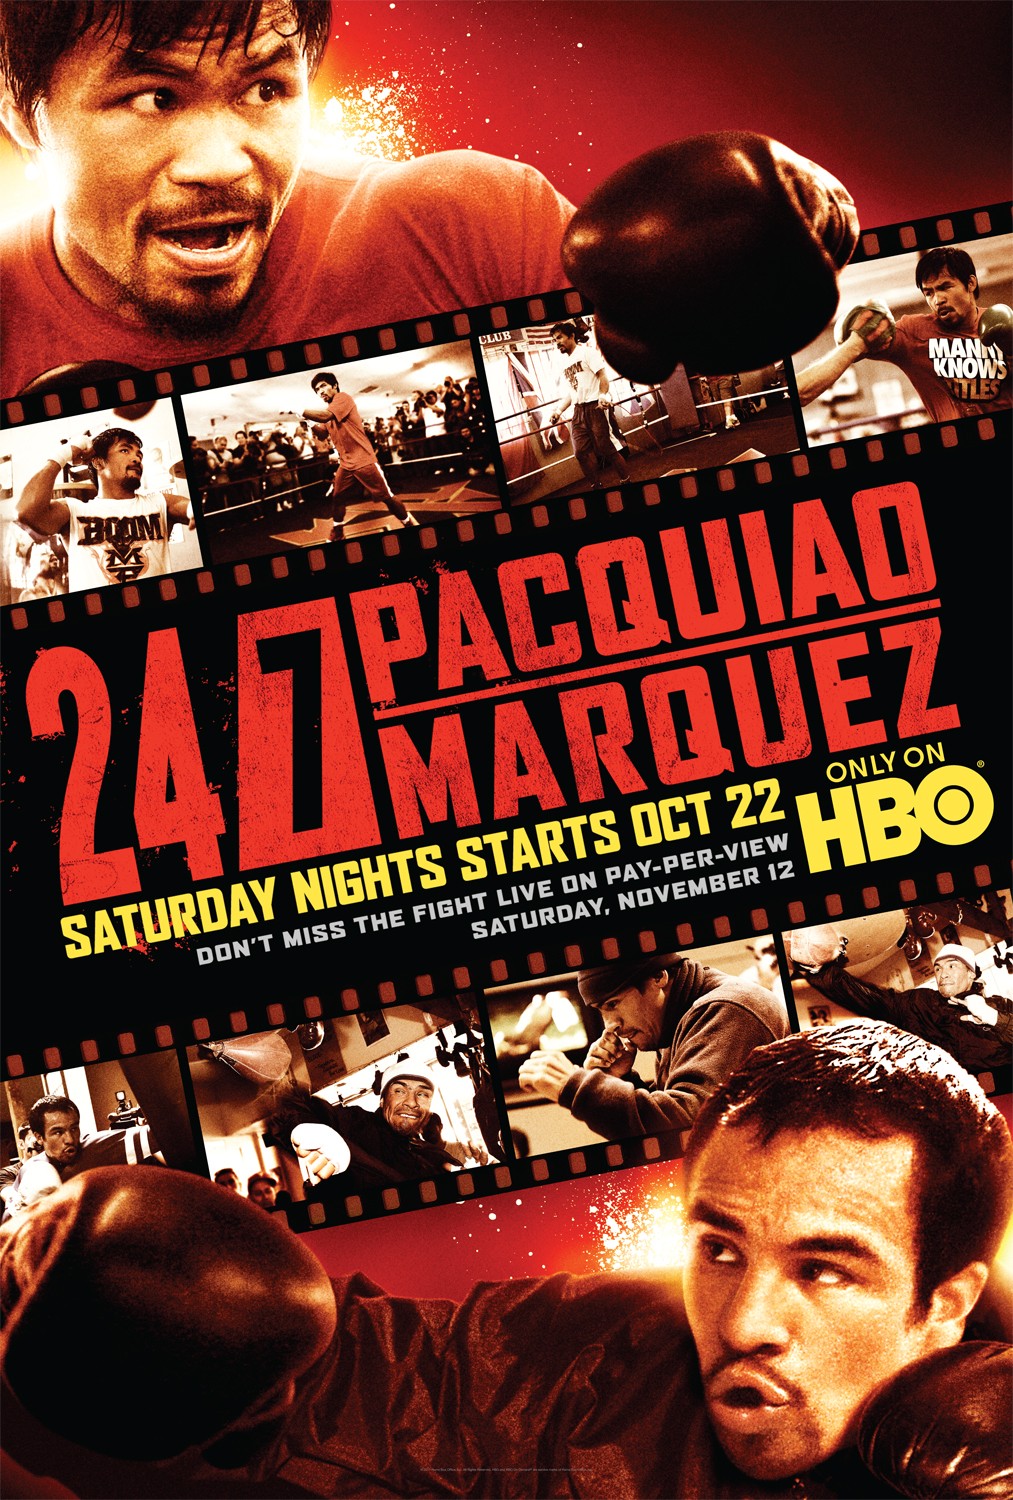 Extra Large TV Poster Image for 24/7 Pacquiao vs Marquez 